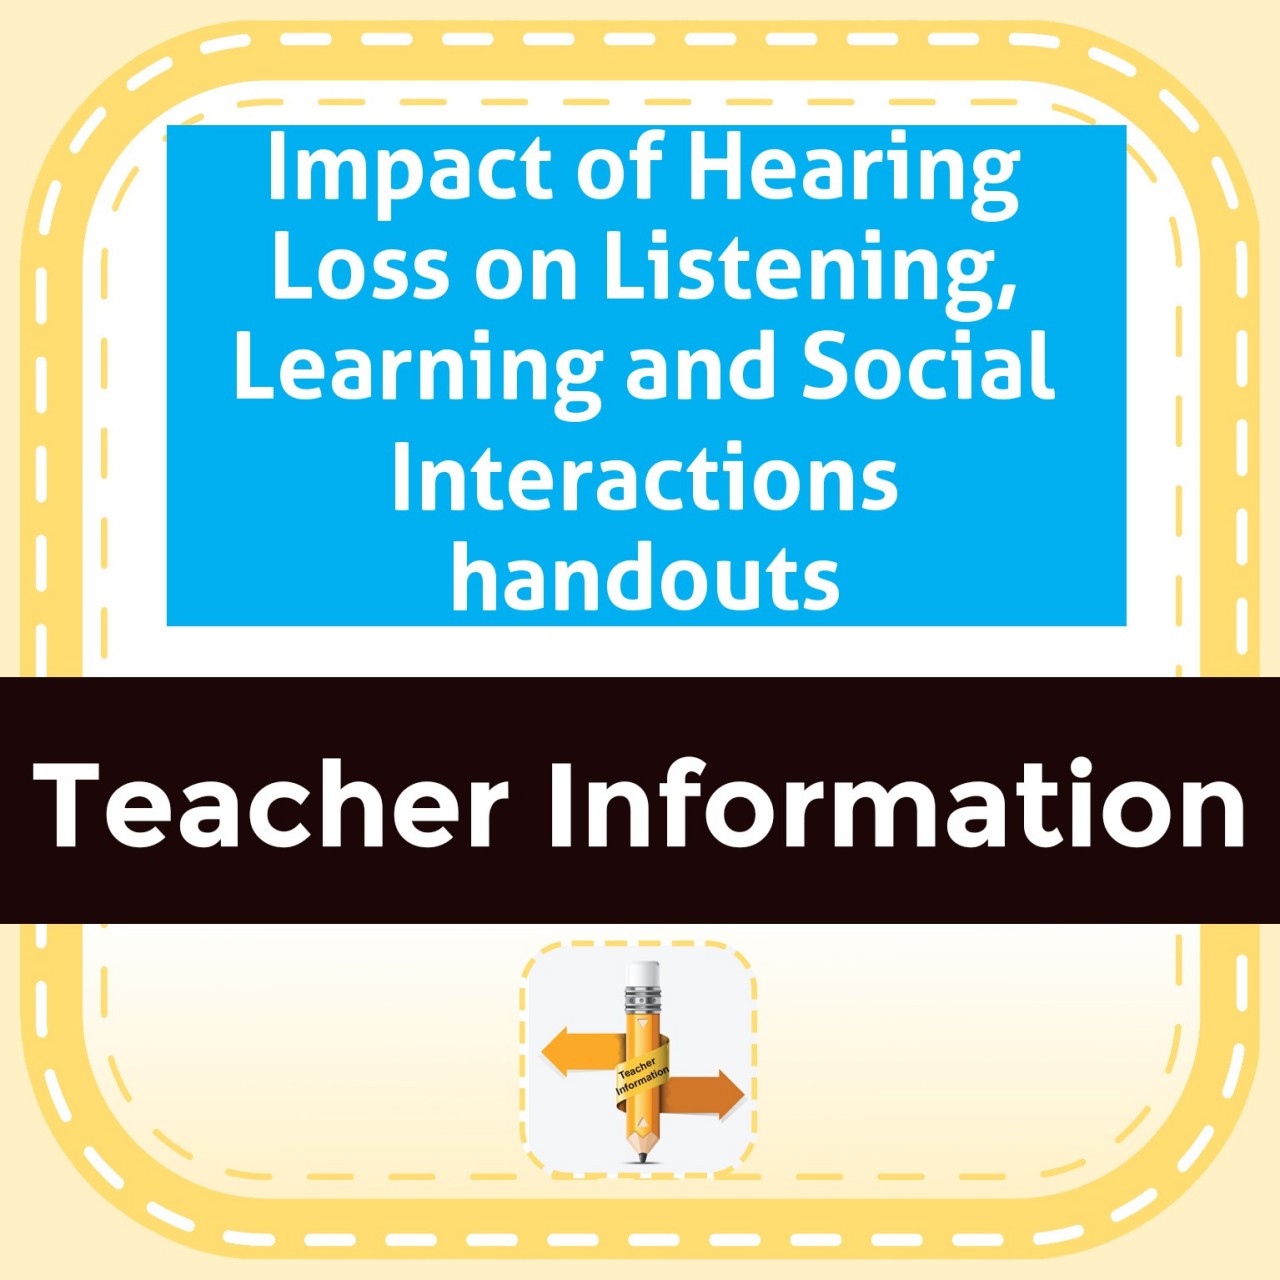 Impact of Hearing Loss on Listening, Learning and Social Interactions handouts